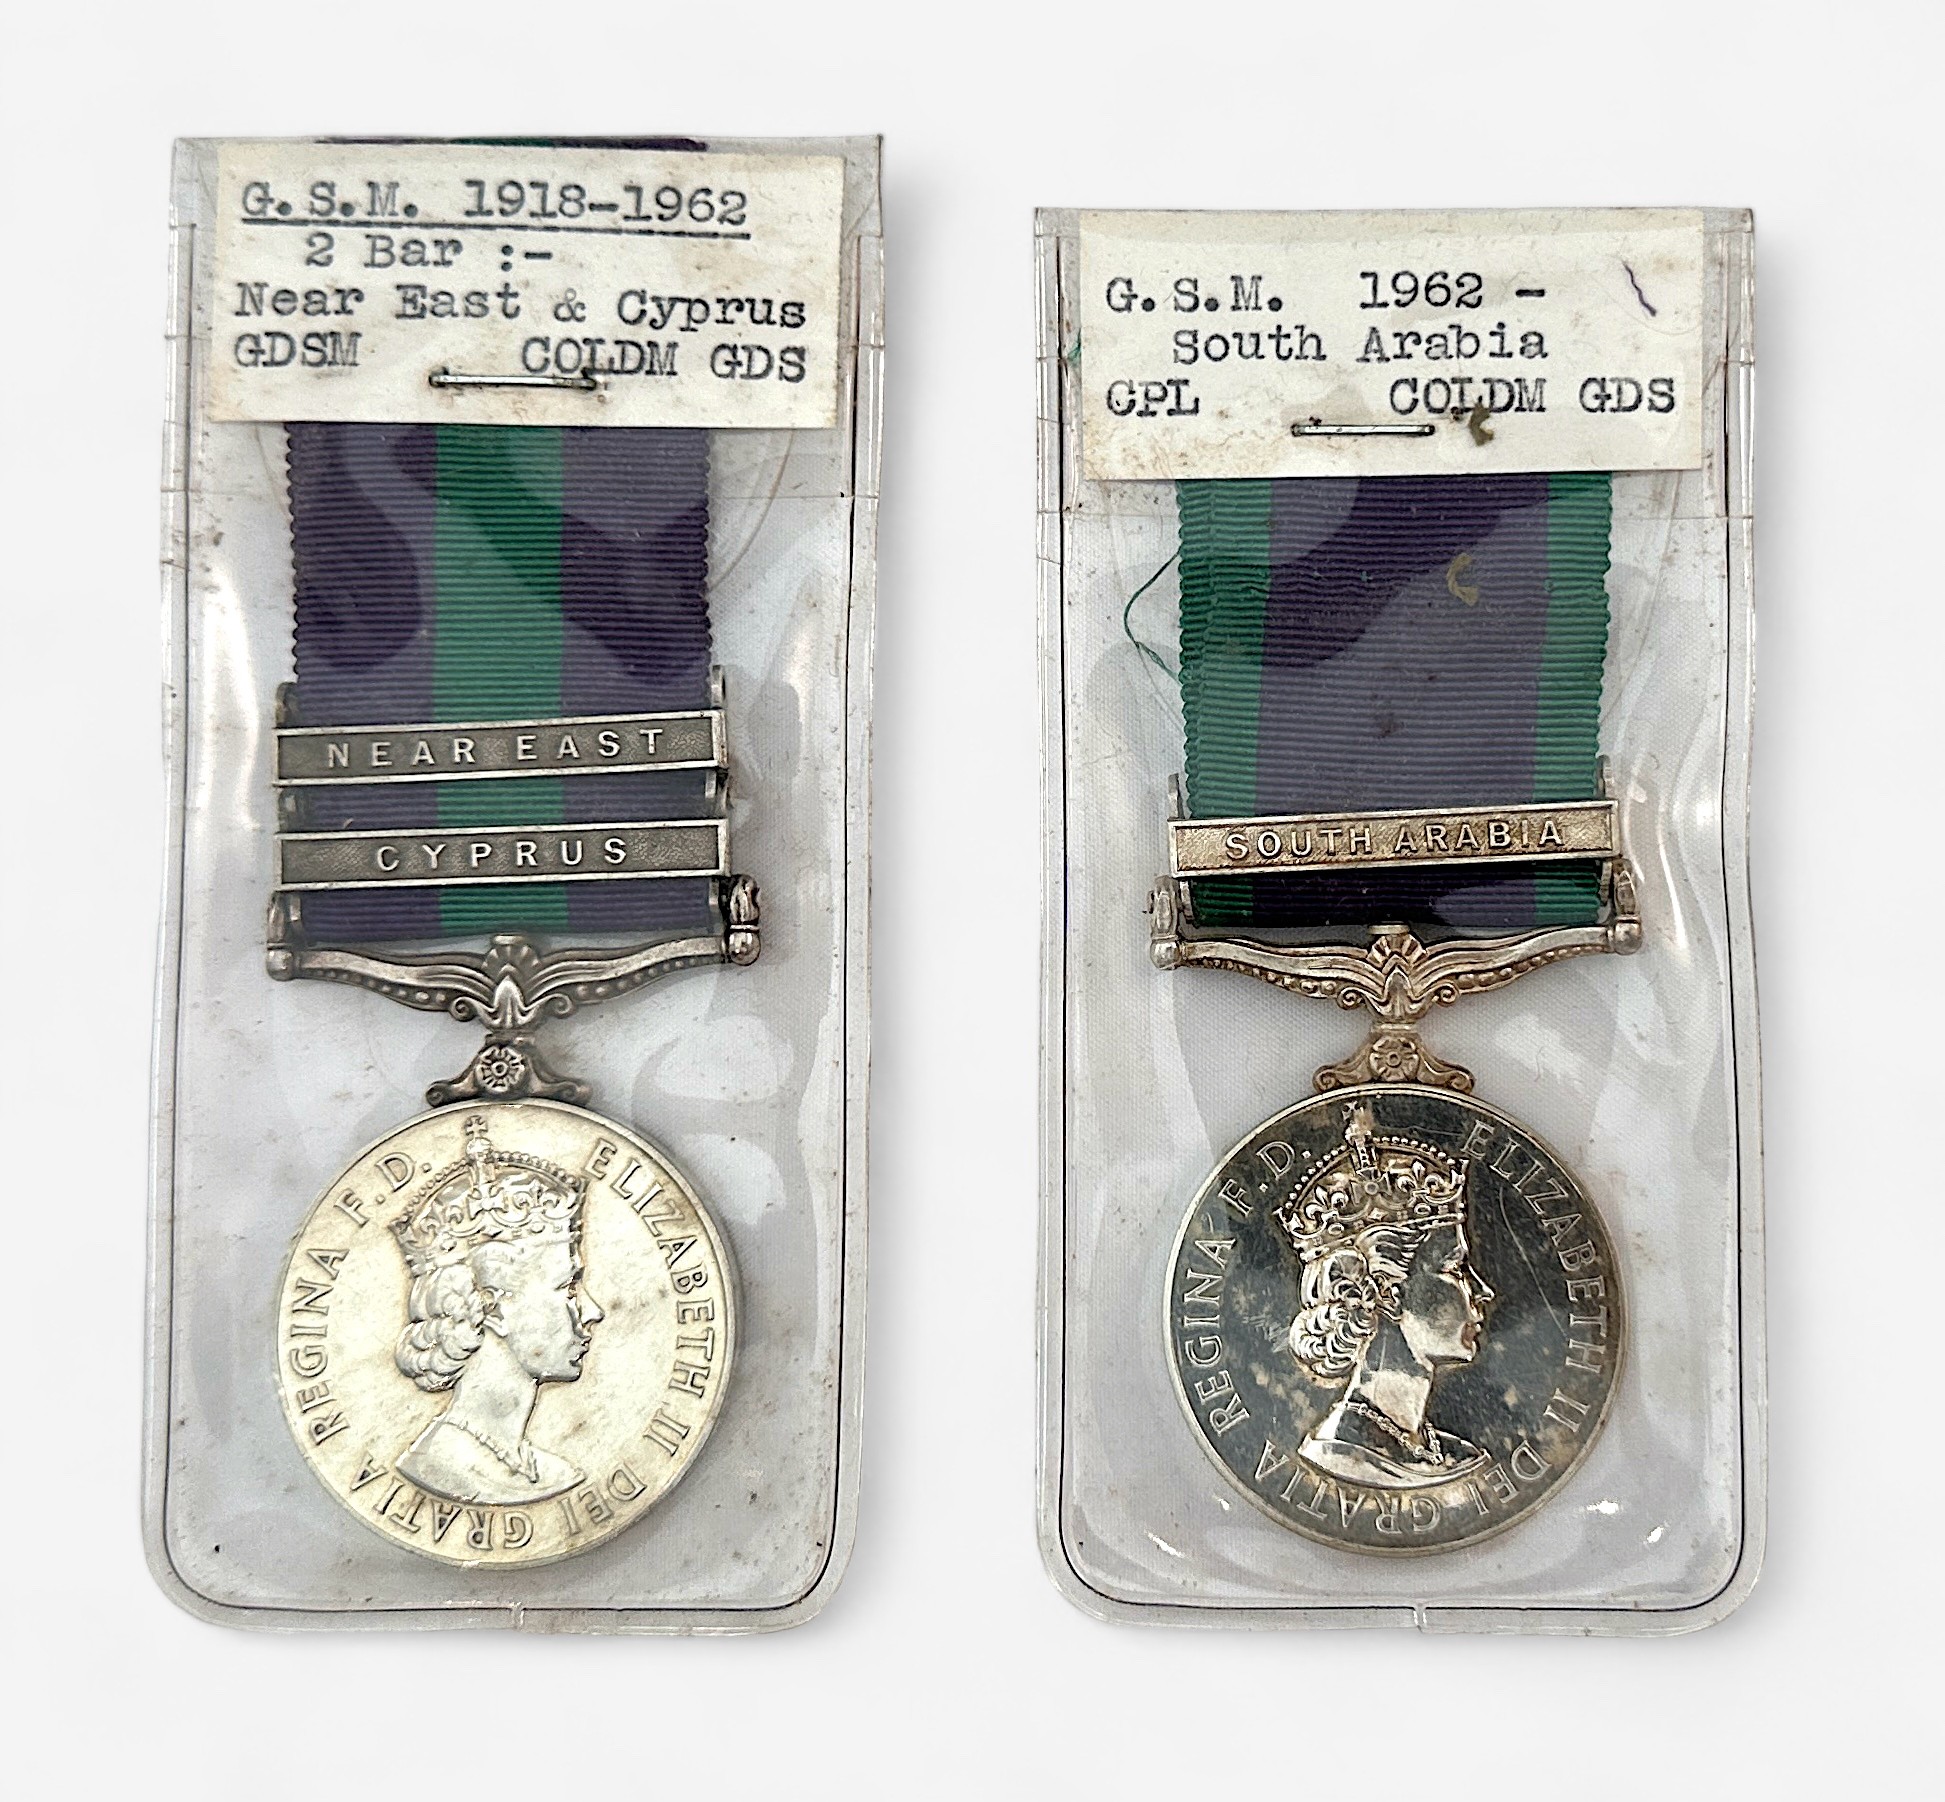 Two various ERII Coldstream Guards Genral Serrvice Medals 1918-1962 GSM with Near East and Cyprus